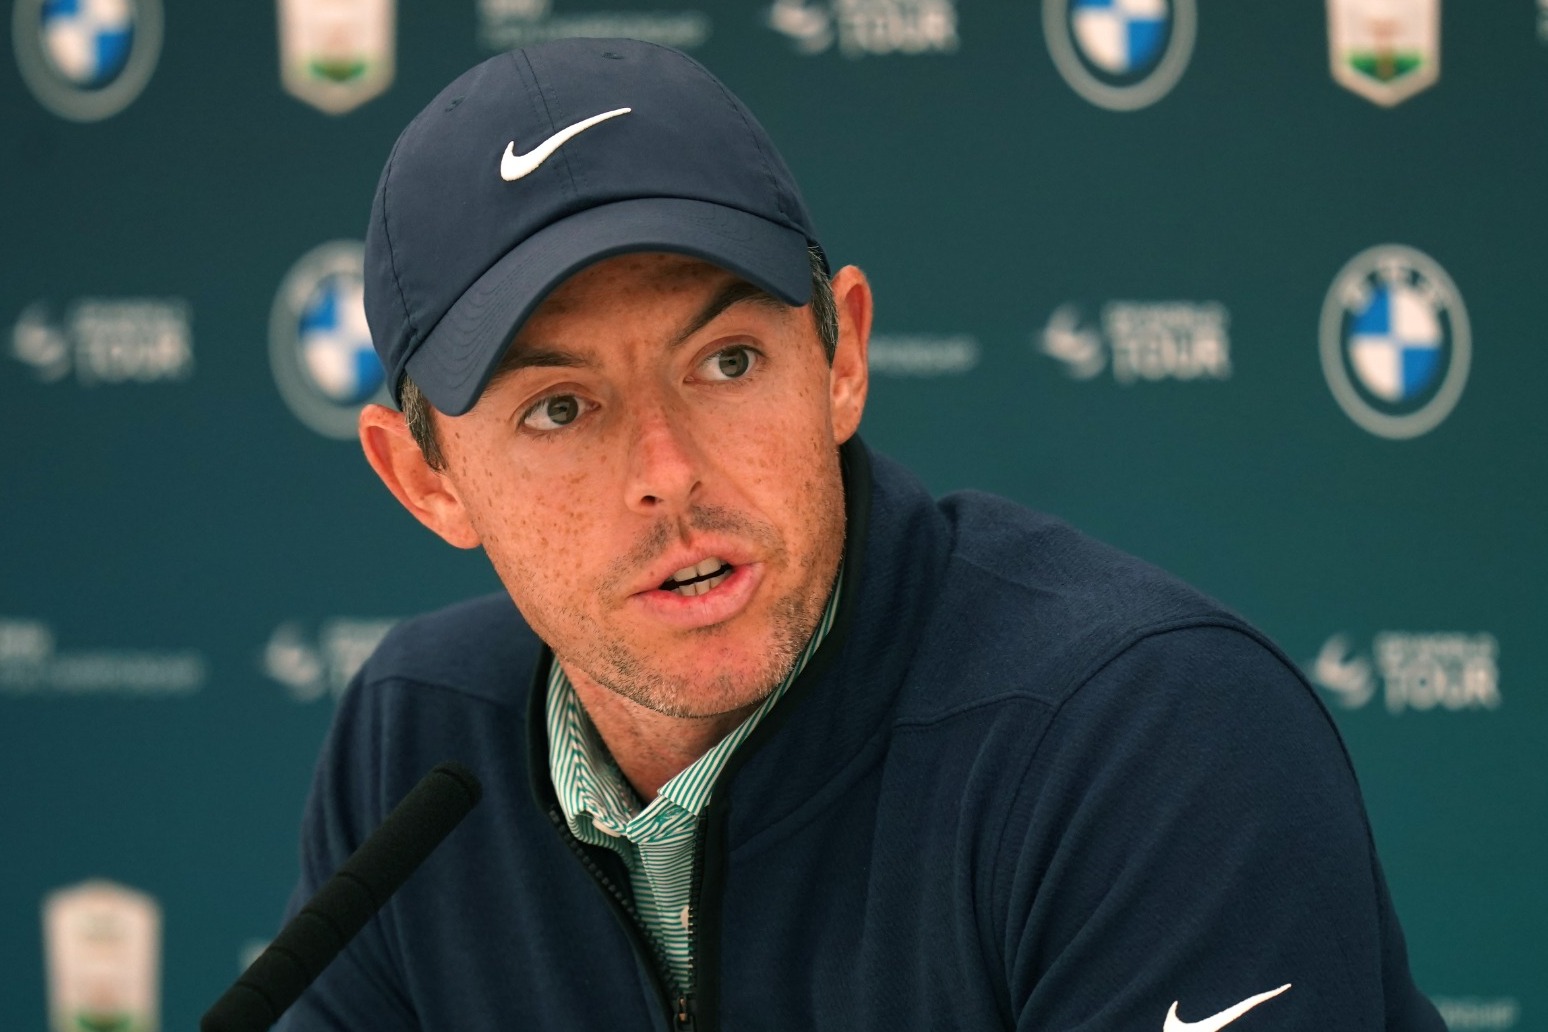 McIlroy claims first PGA Tour hole in one 